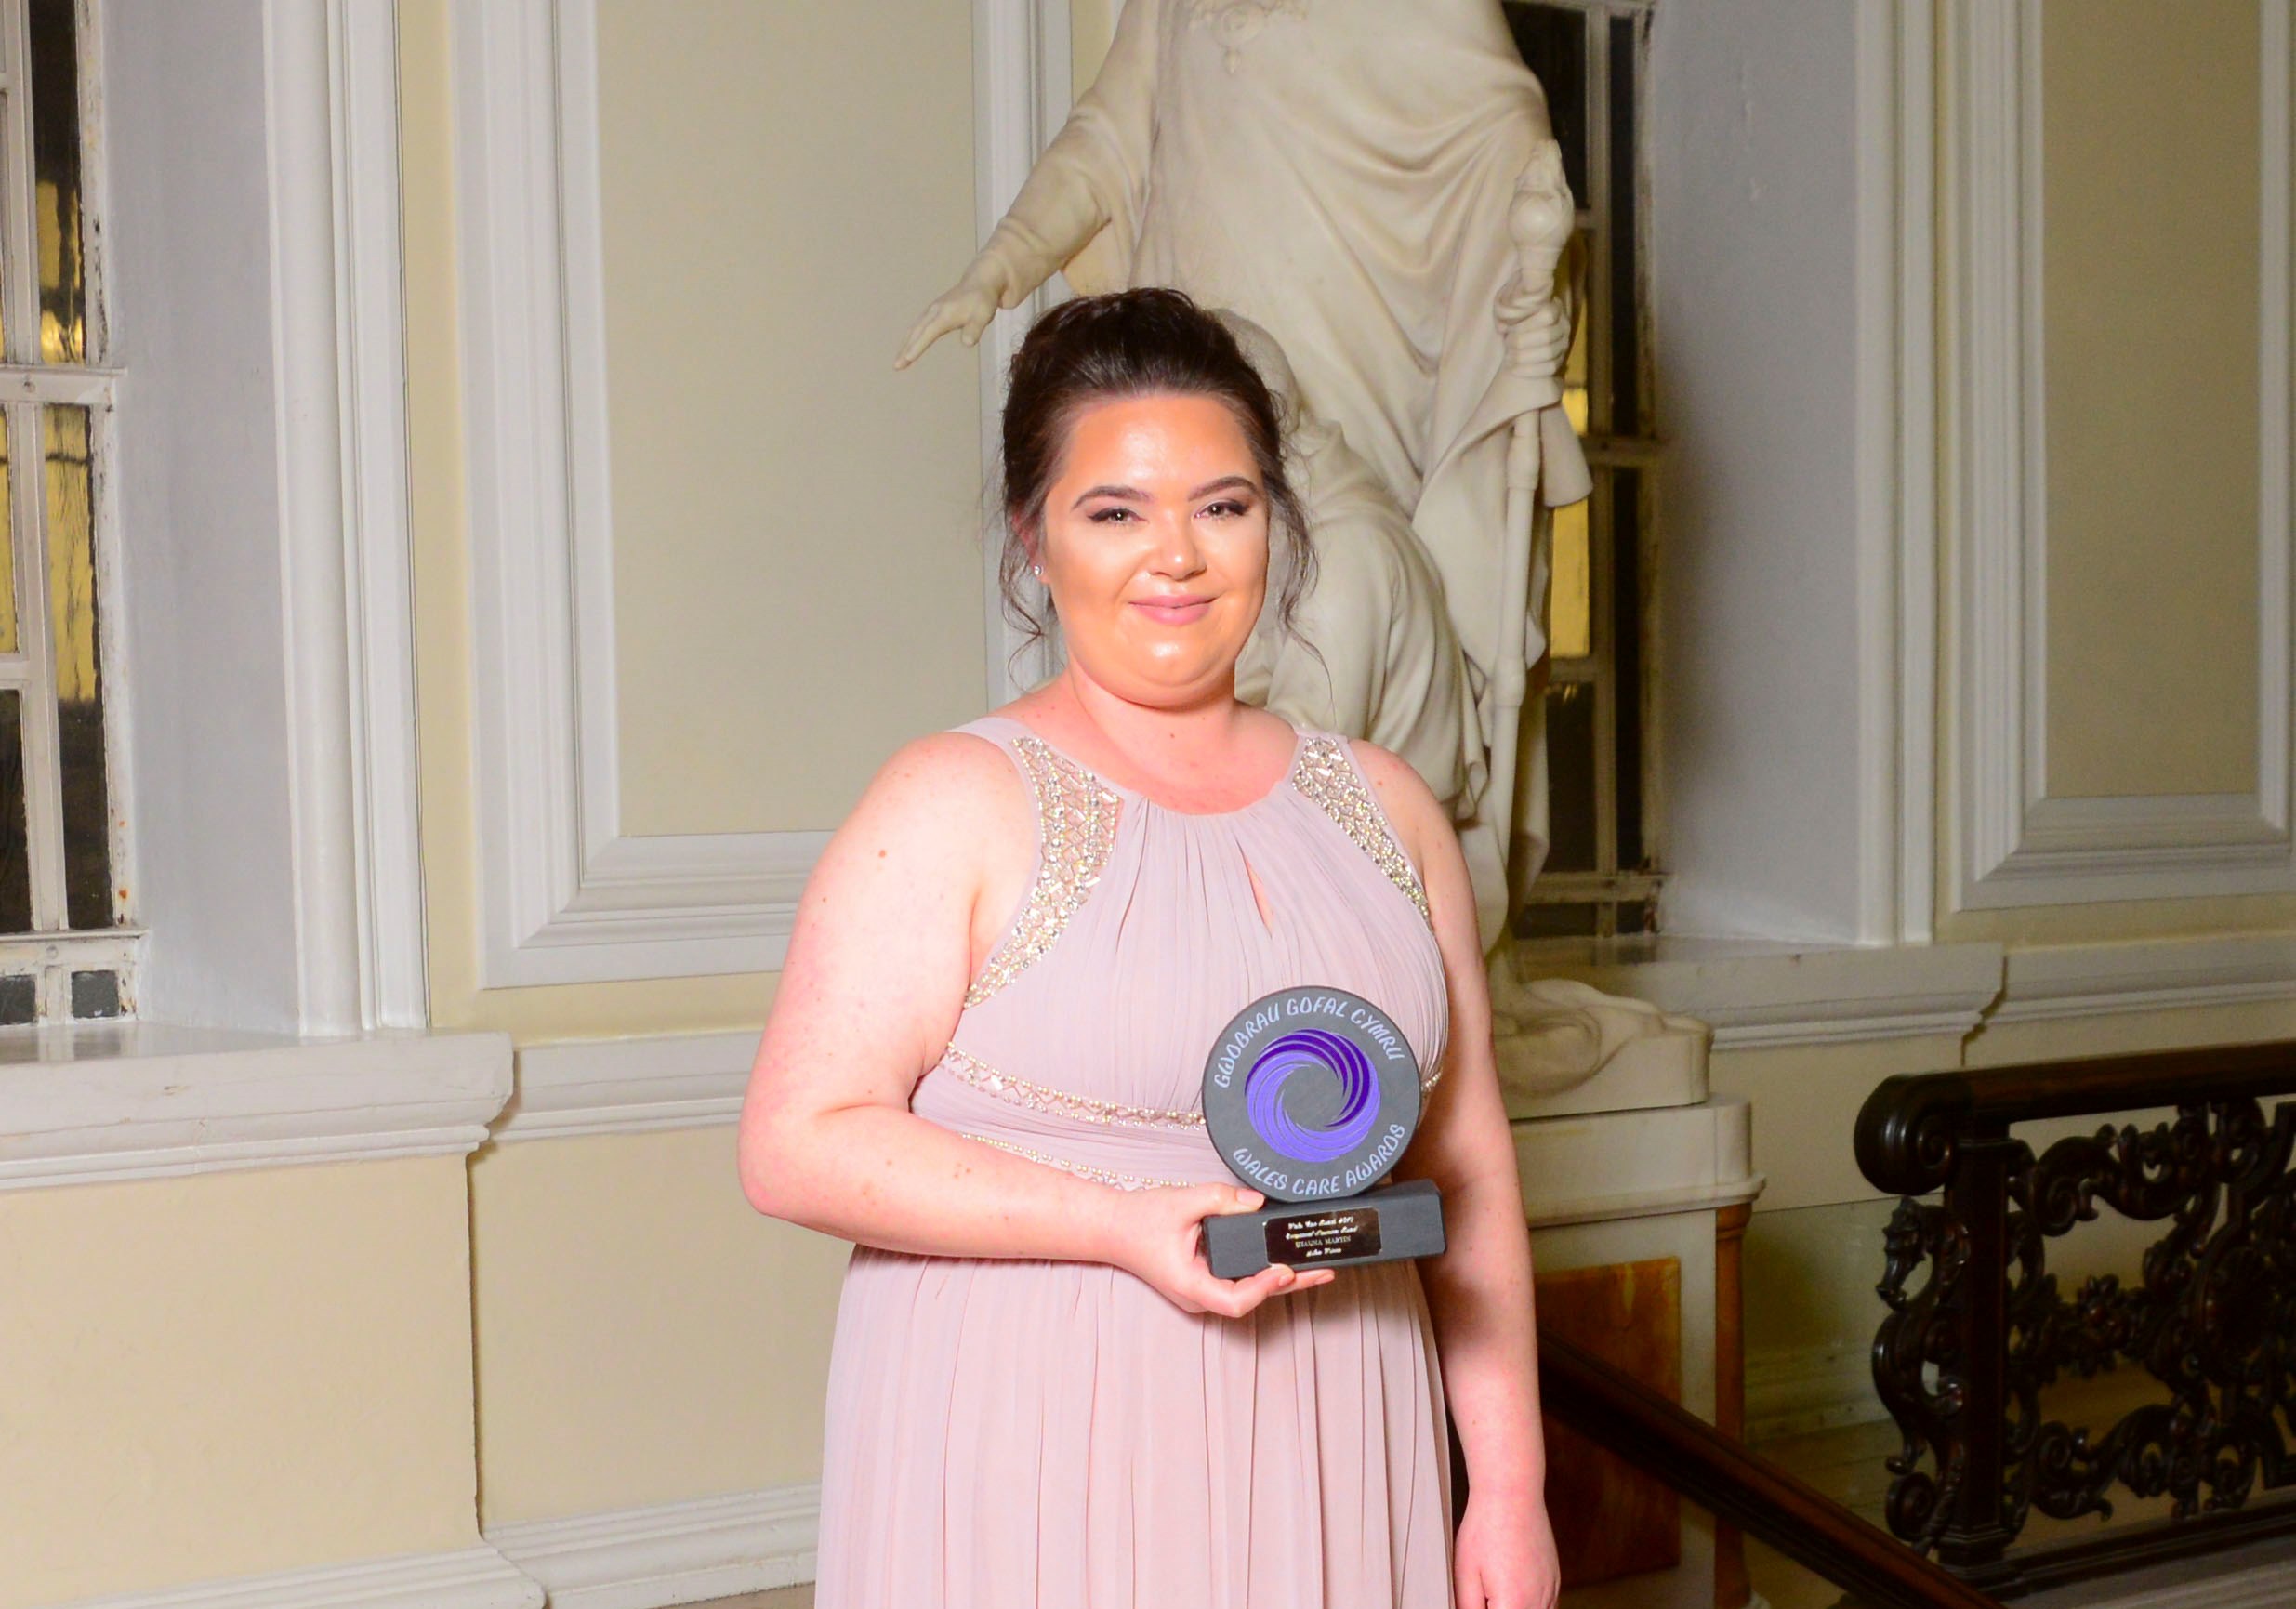 Caring Shauna honoured for her silver service